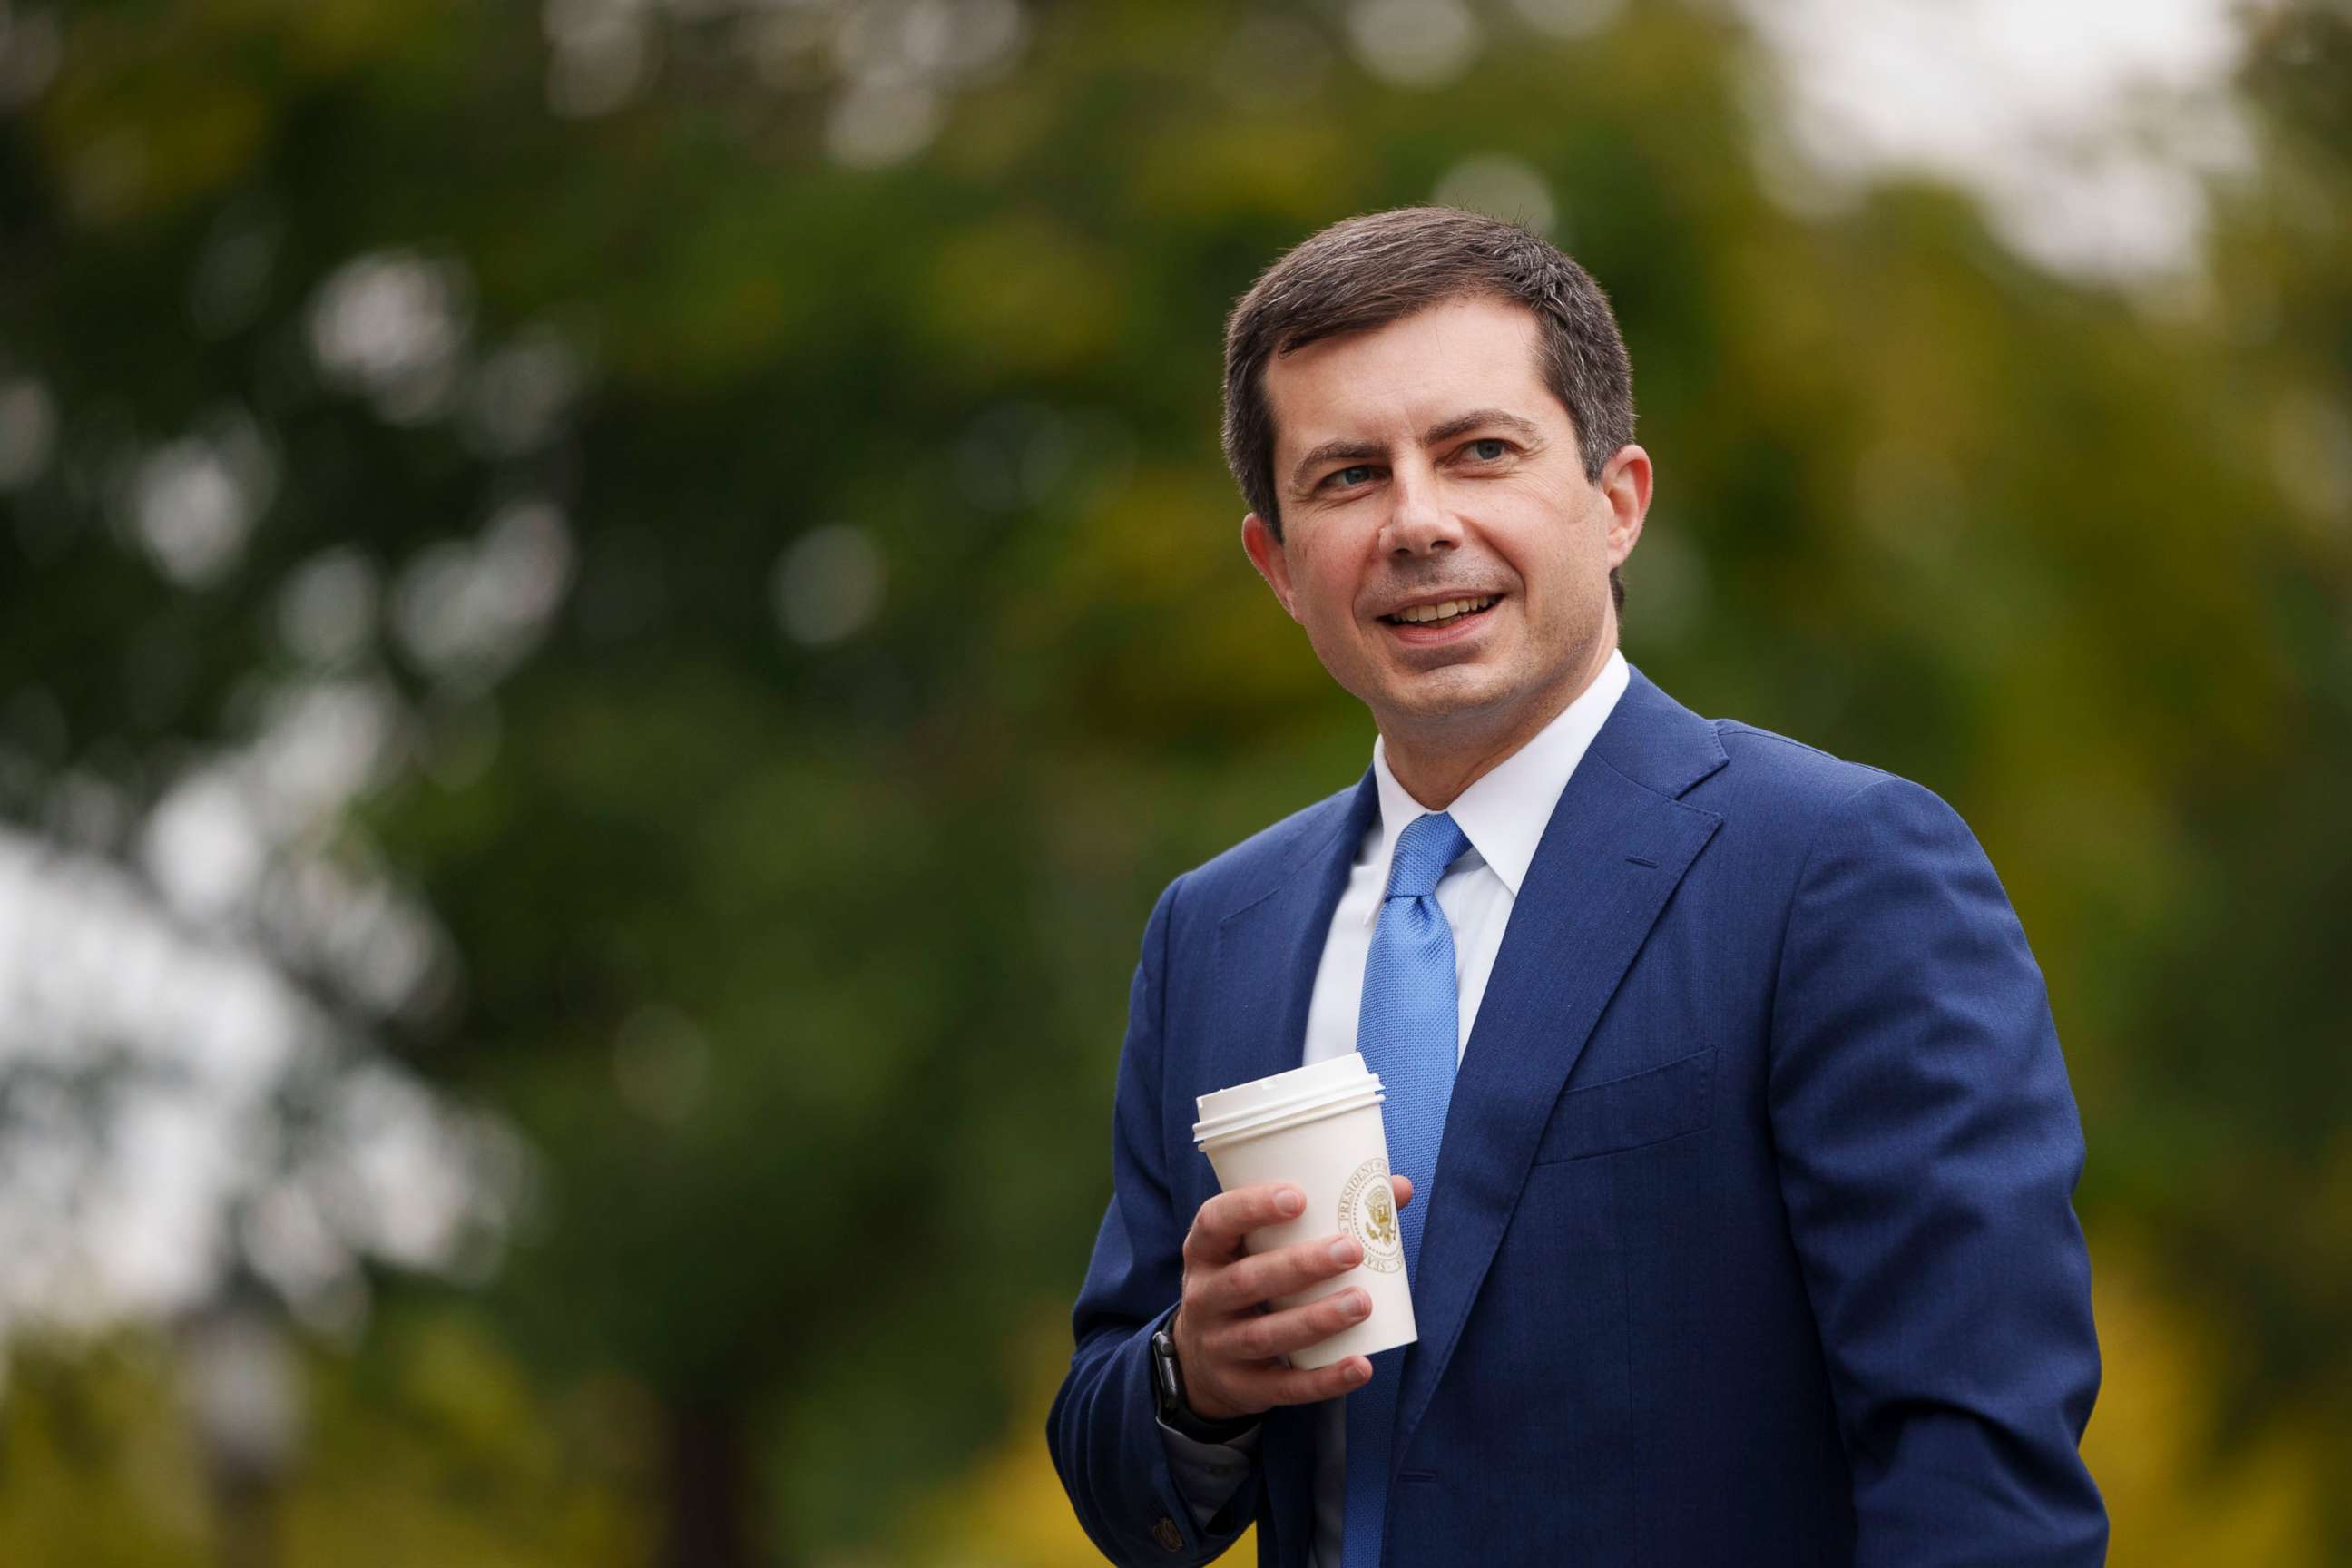 PHOTO: U.S. Transportation Secretary Pete Buttigieg arrives for a television interview with CNBC outside the White House, Oct. 13, 2021, in Washington, D.C.